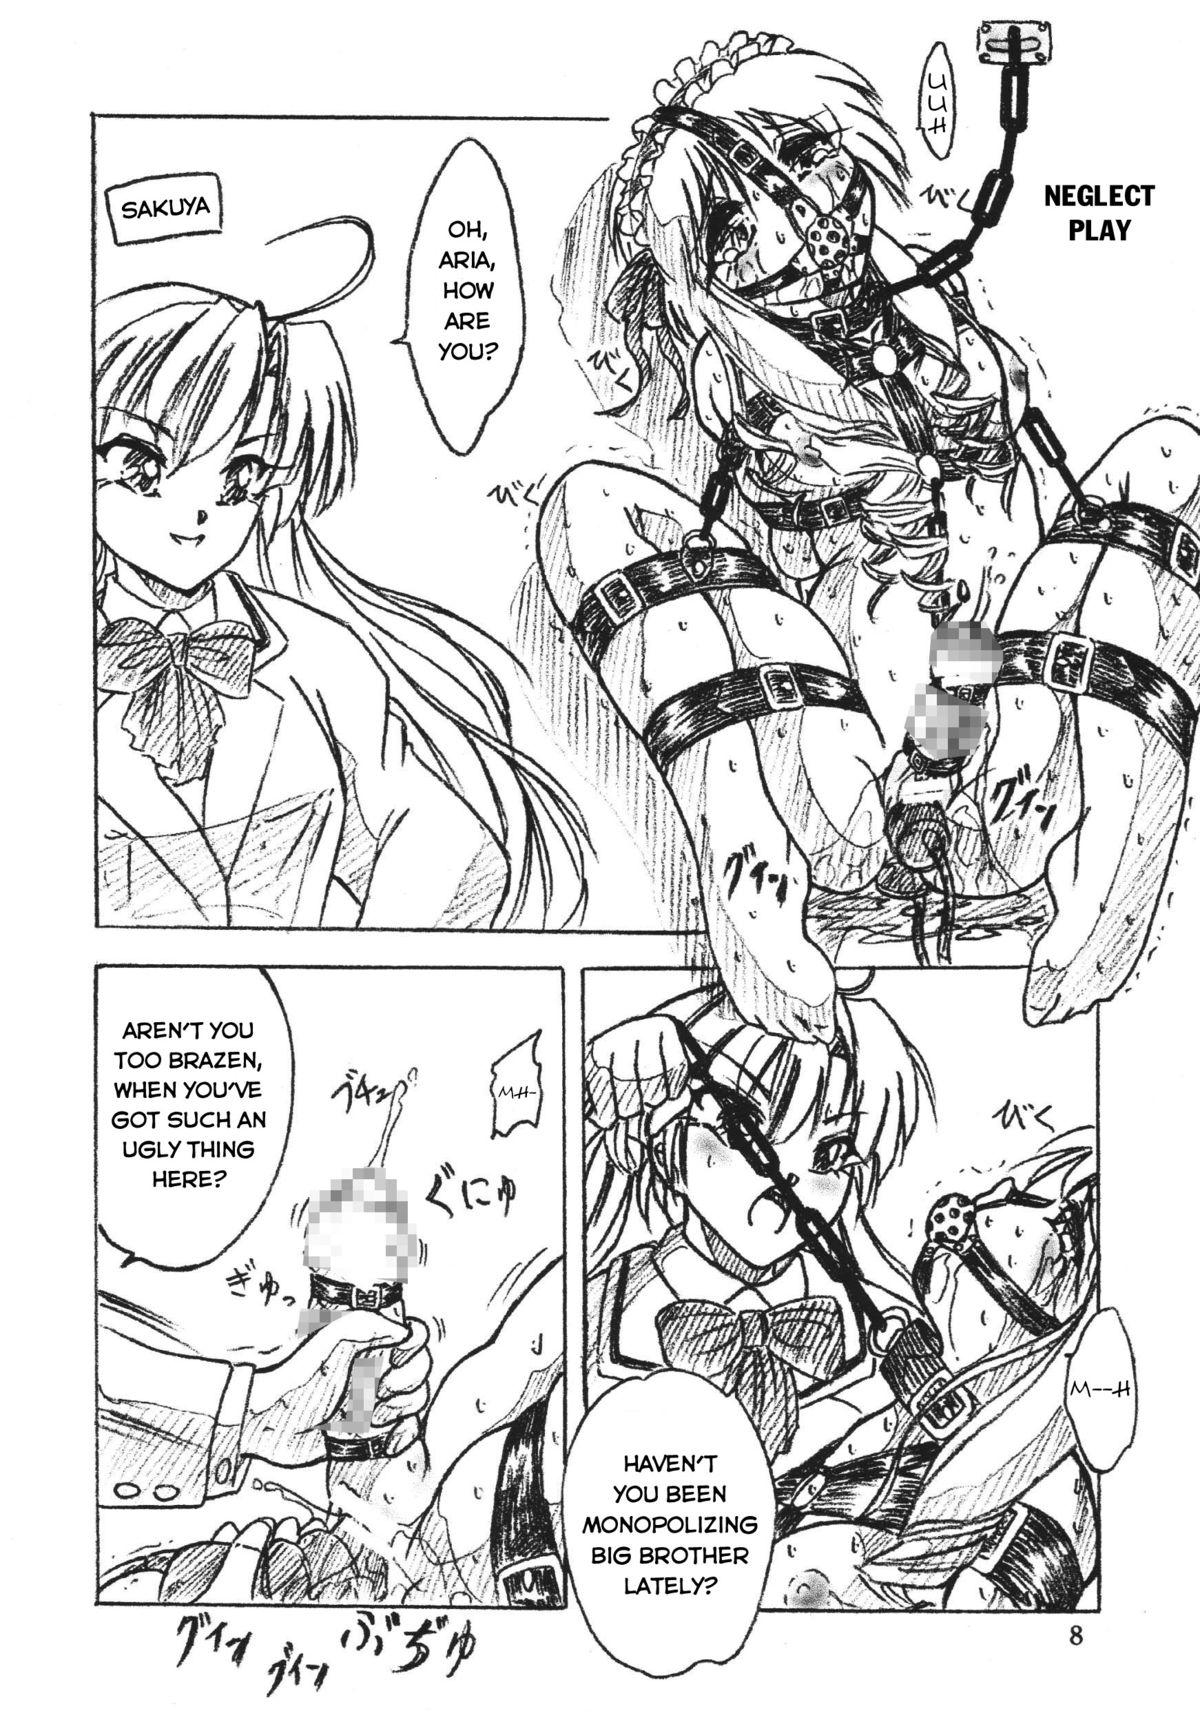 Branquinha Majo Gari | Witch Hunt - Chobits Tokyo mew mew Facefuck - Page 8